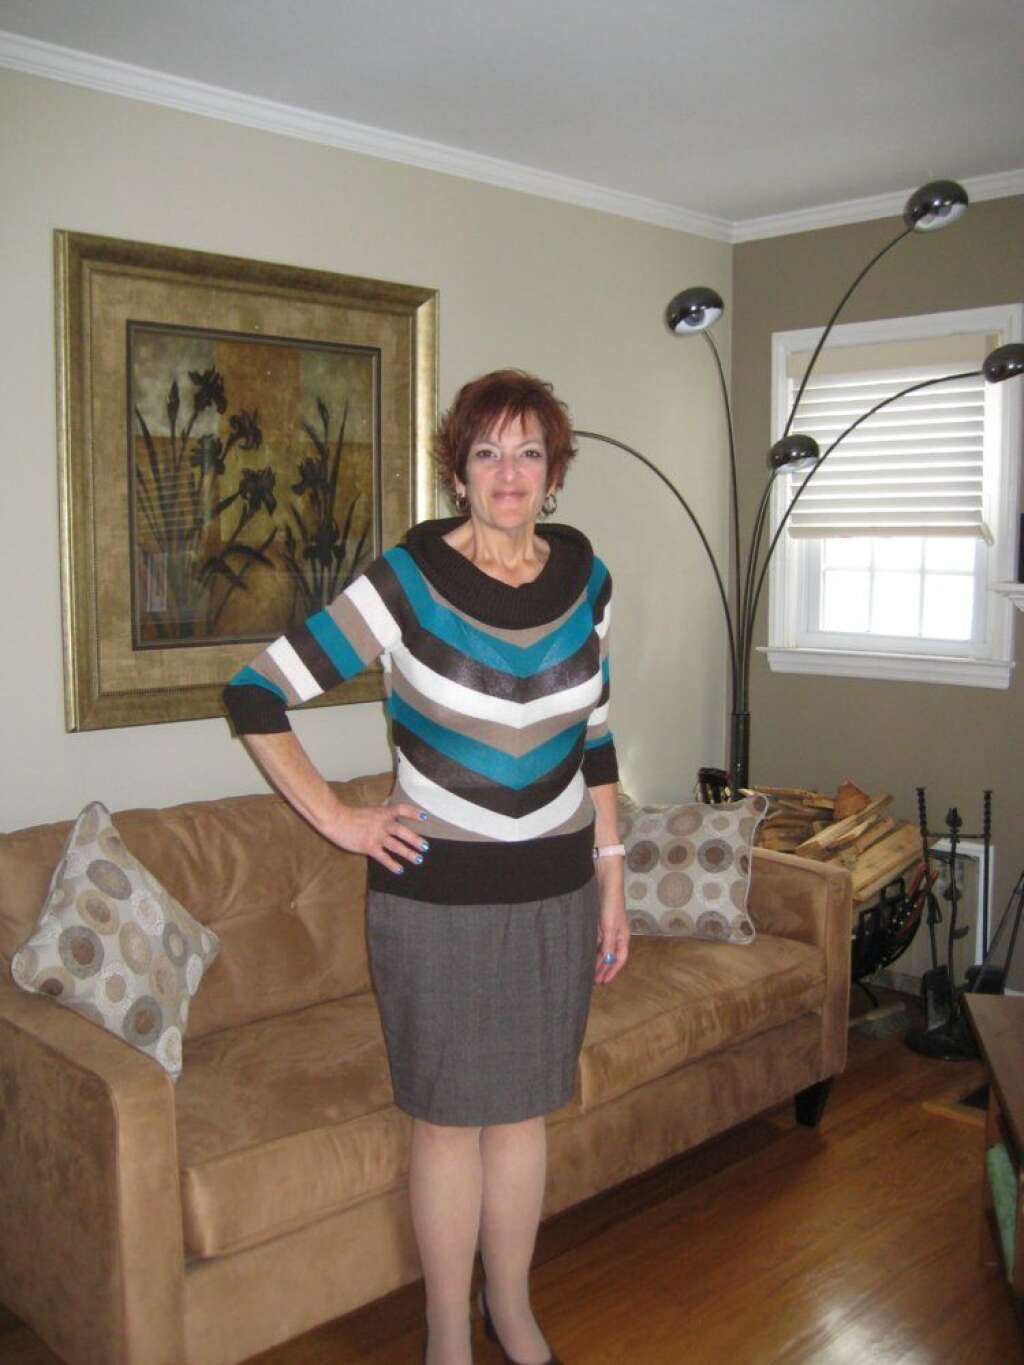 Jennie AFTER - <a href="http://www.huffingtonpost.com/2012/10/30/i-lost-weight-jennie-lewis_n_2044841.html">Read Jennie's story here.</a>